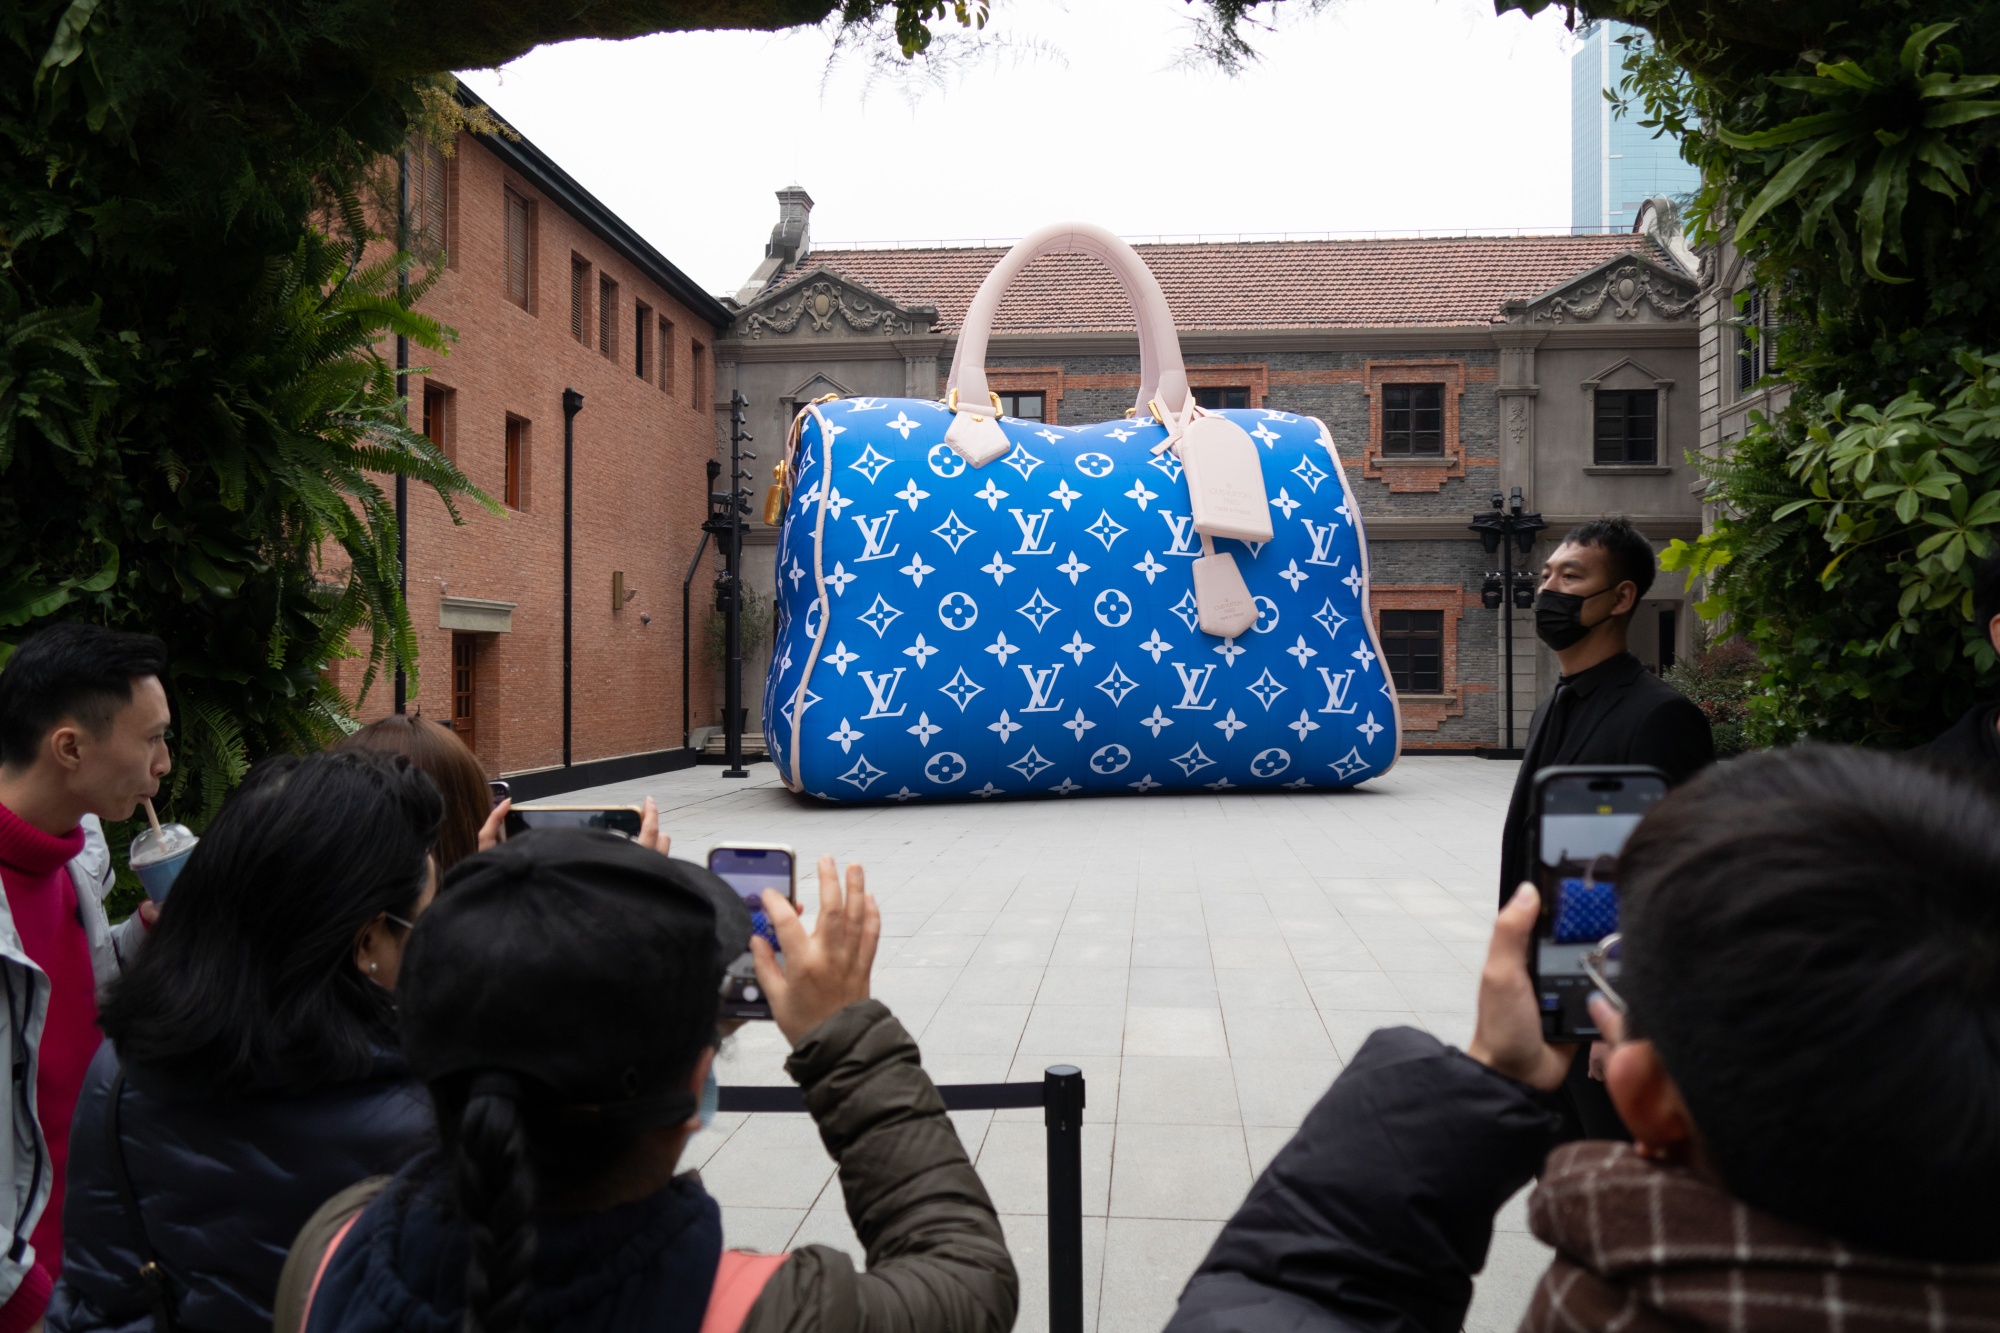 Bystanders photograph a giant Louis Vuitton bag on display in Shanghai. Luxury return rates in e-commerce obsessed China are increasing.